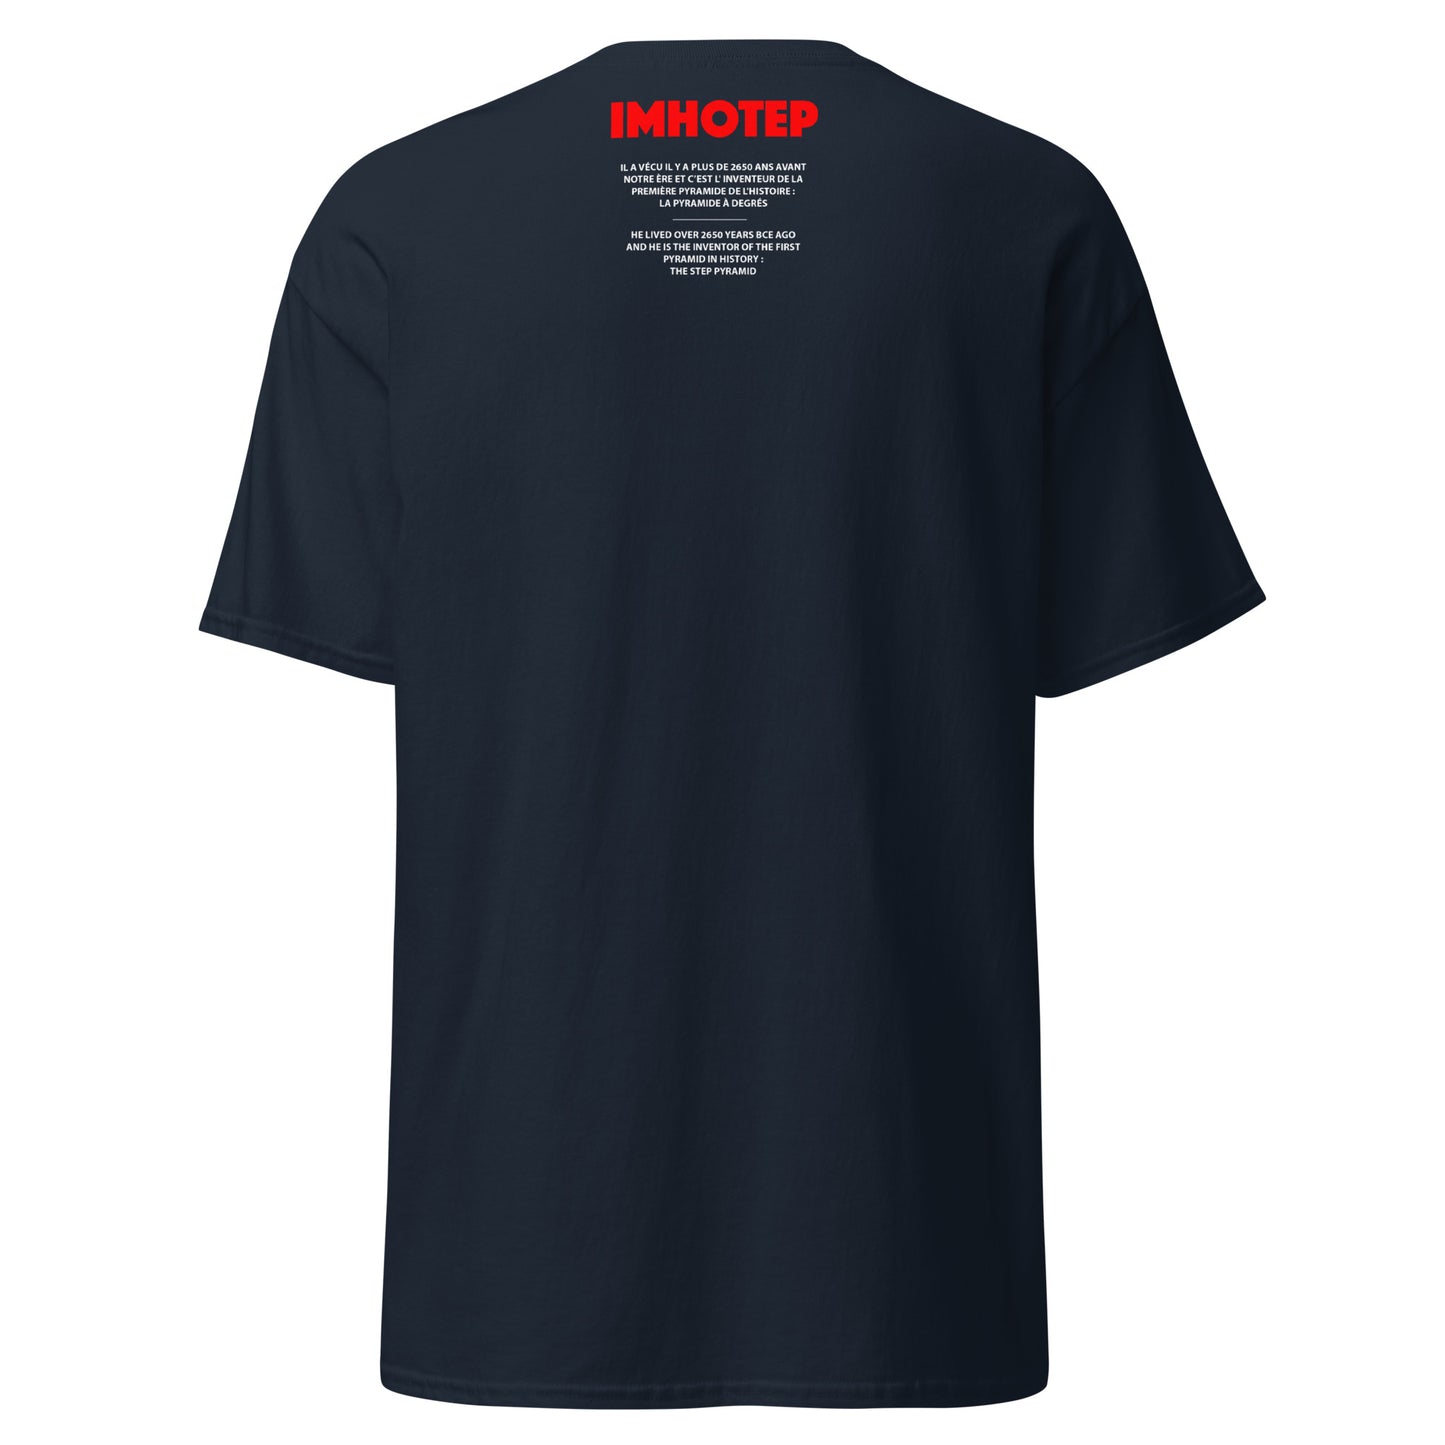 IMHOTEP (T-shirt)